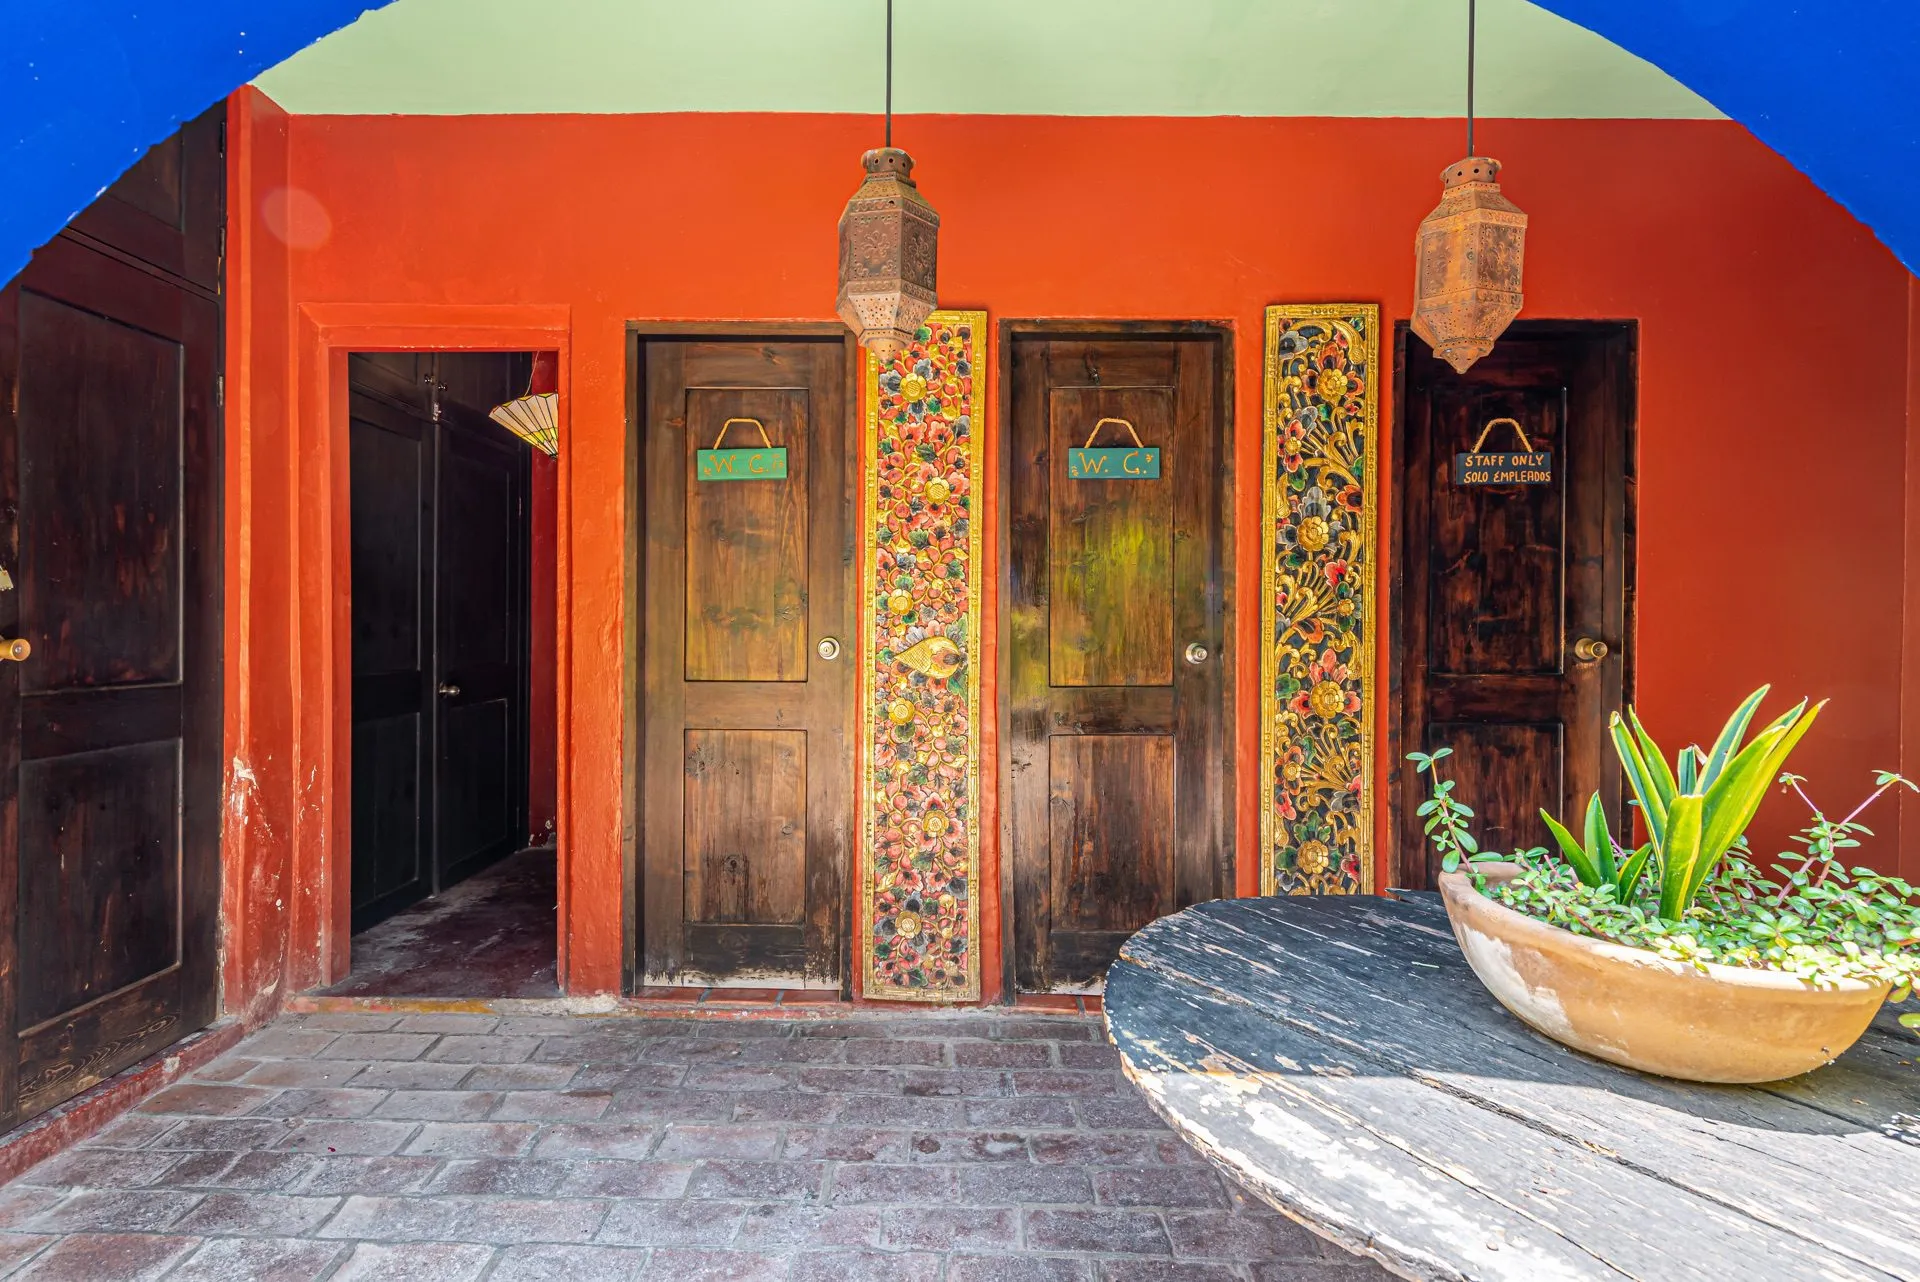 Built in 1947 by “El Chino,” the legendary Hotel California is now available for sale to selective buyers. This iconic landmark in Todos Santos underwent a masterful renovation in 2001, resulting in eleven unique guest rooms and suites.